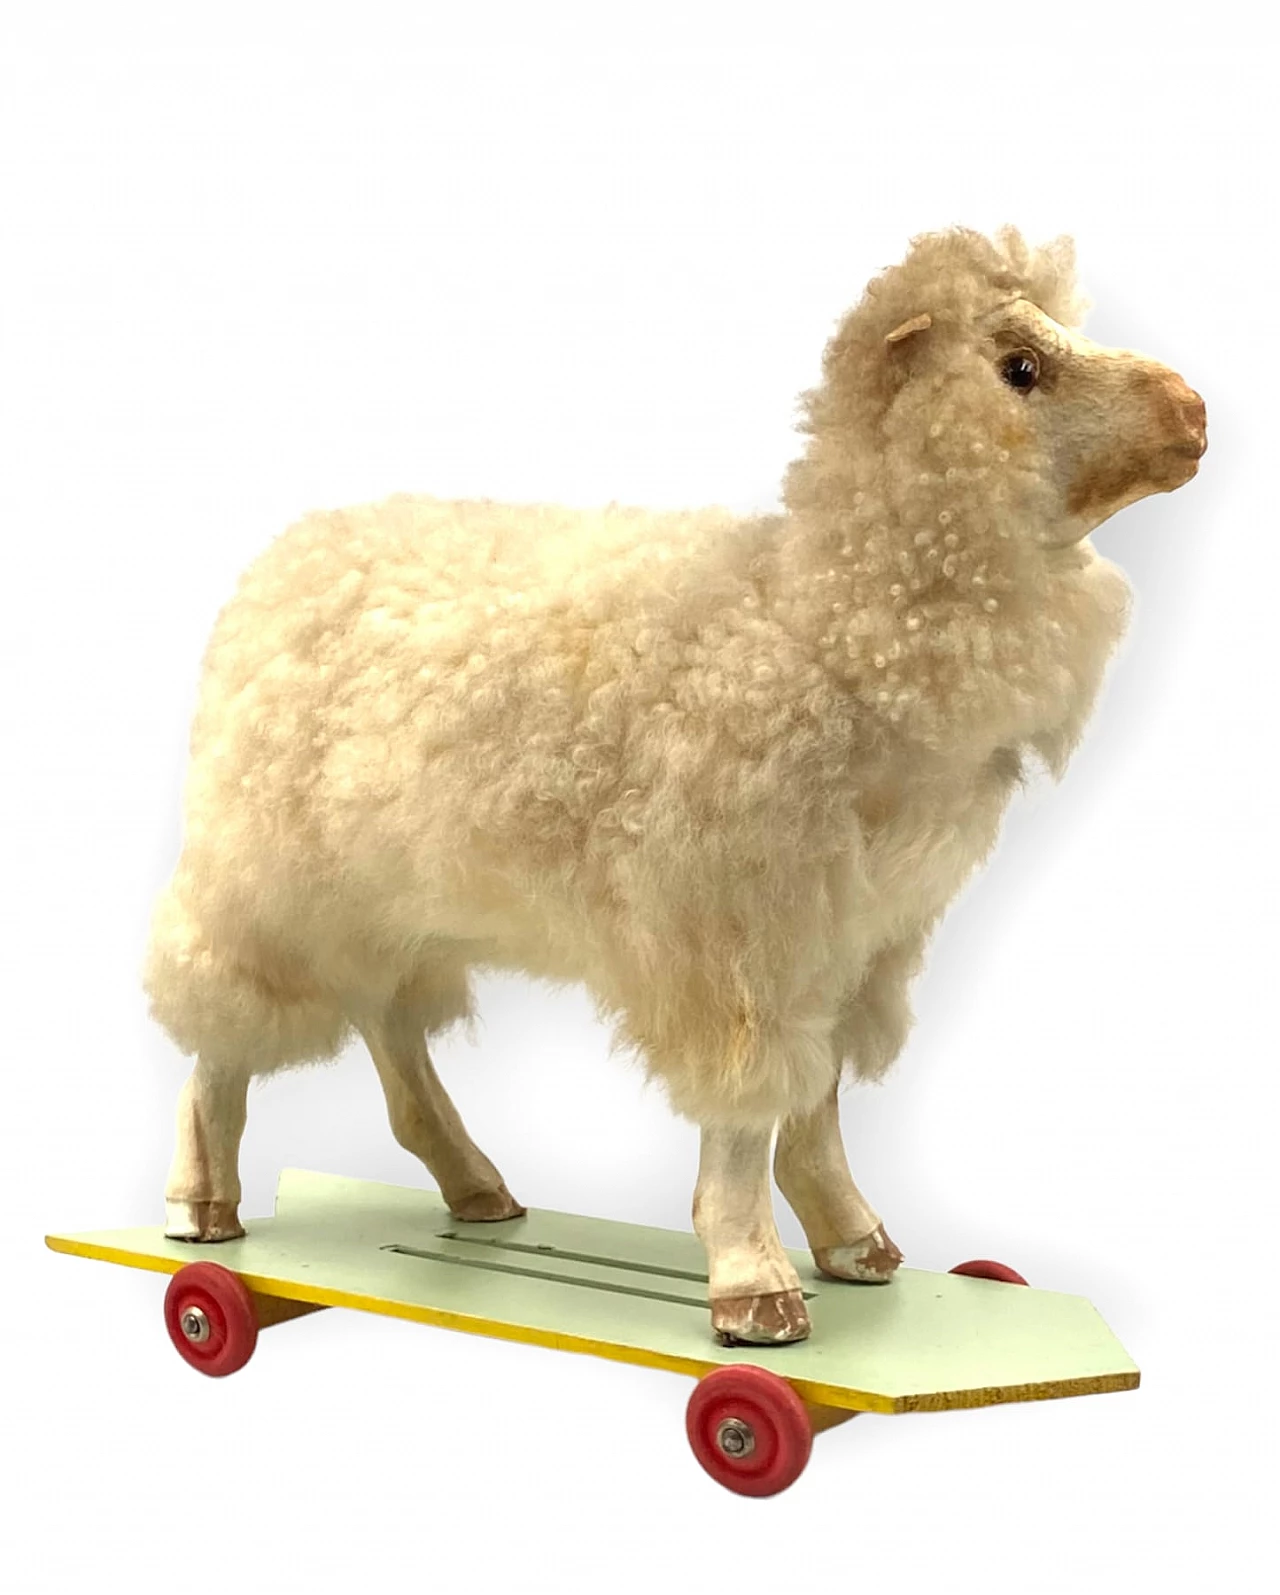 Wool and wood toy sheep with wheels 11